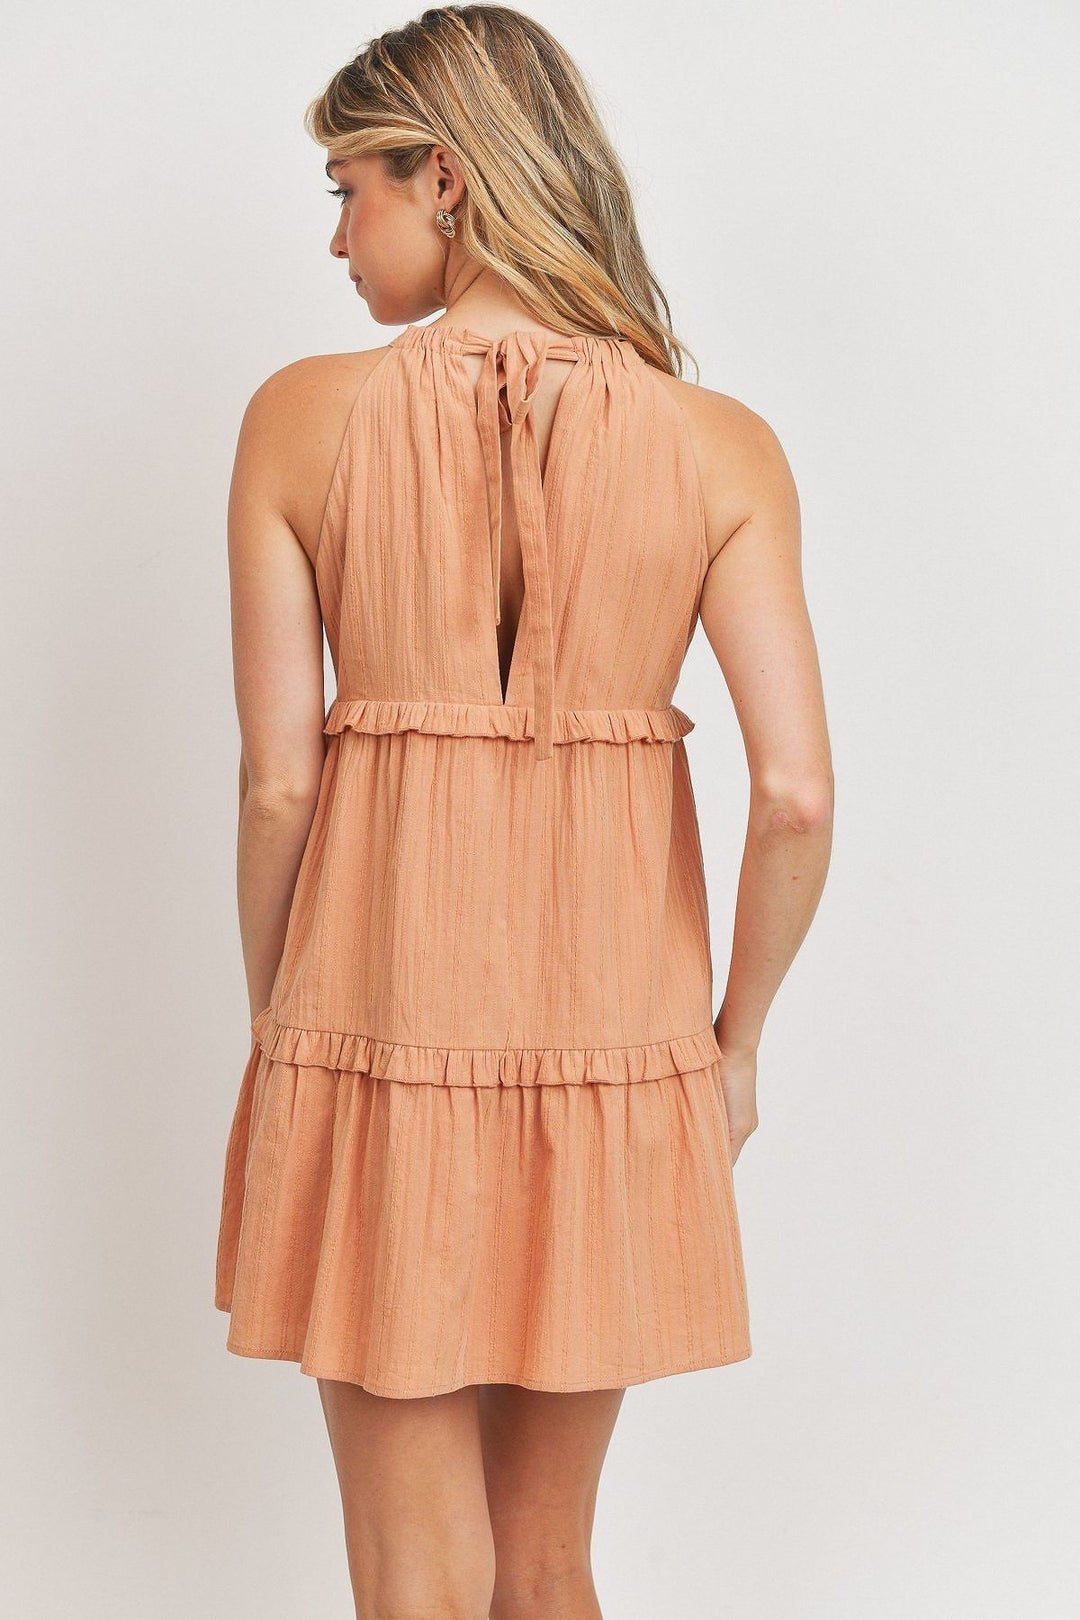 Textured Woven Fabric With Tiered Sleeveless Dress in Blush